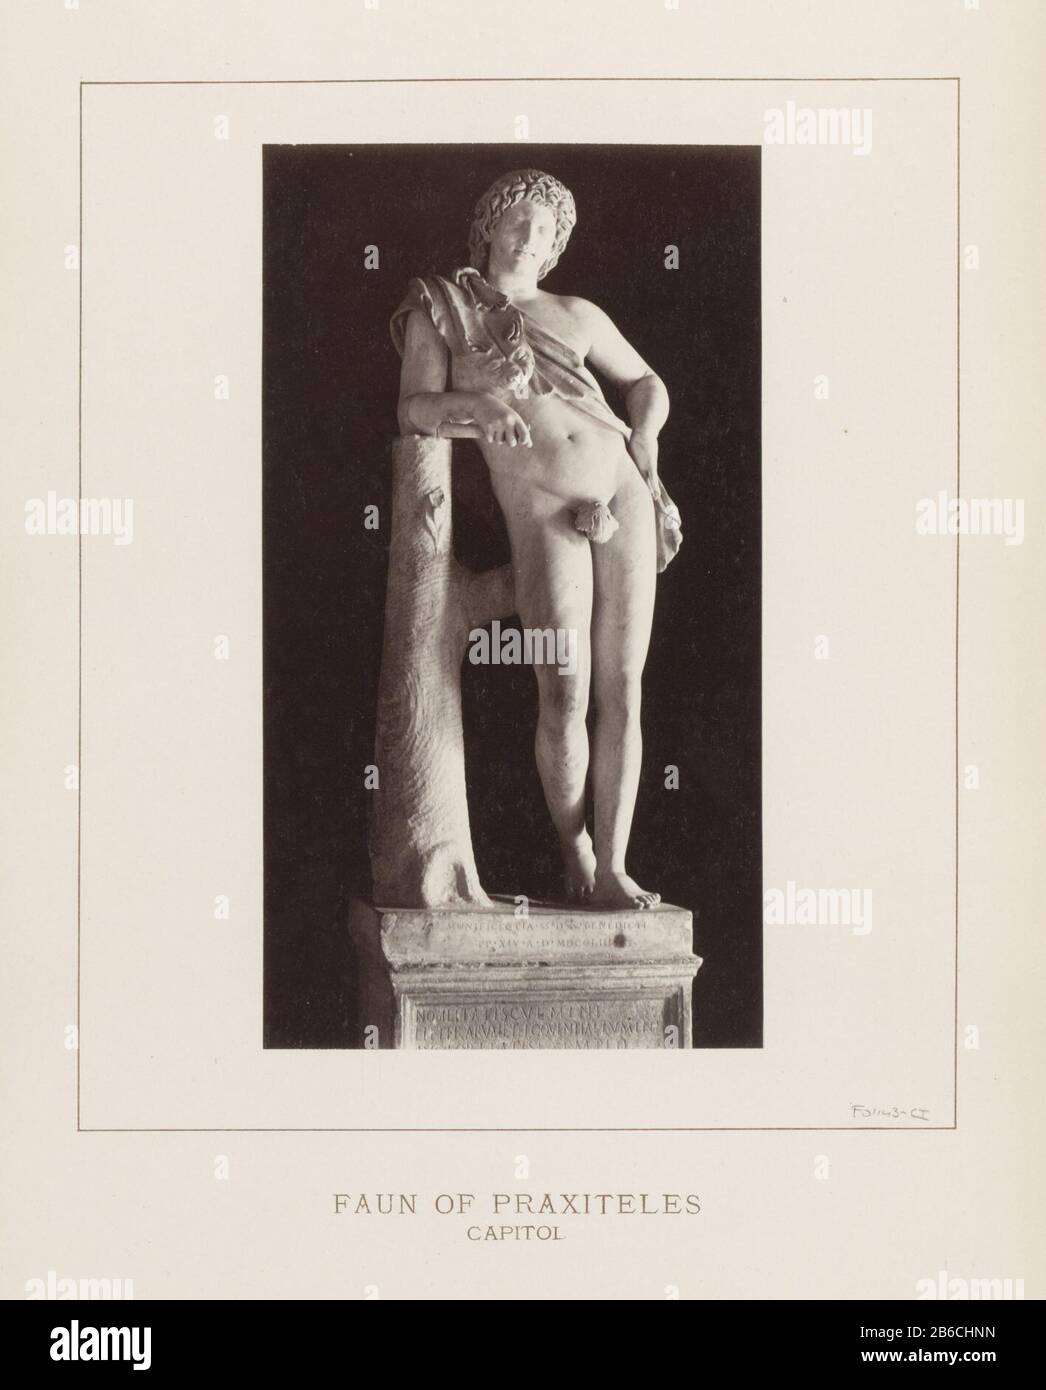 Faun sculpture of Praxiteles Faun of Praxiteles, Capitol (title object) Part of album with Seen from where shots: conditions and artworks Rome. Manufacturer : photographer : anonymous location manufacture: Vatican Dating: ca. 1860 - ca. 1900 Physical characteristics: albumin printing material: photo paper Technique: albumin pressure dimensions: picture: h 242 mm × W 134 mm Subject: piece of sculpture, reproduction of a piece of sculpture youth, adolescent Stock Photo